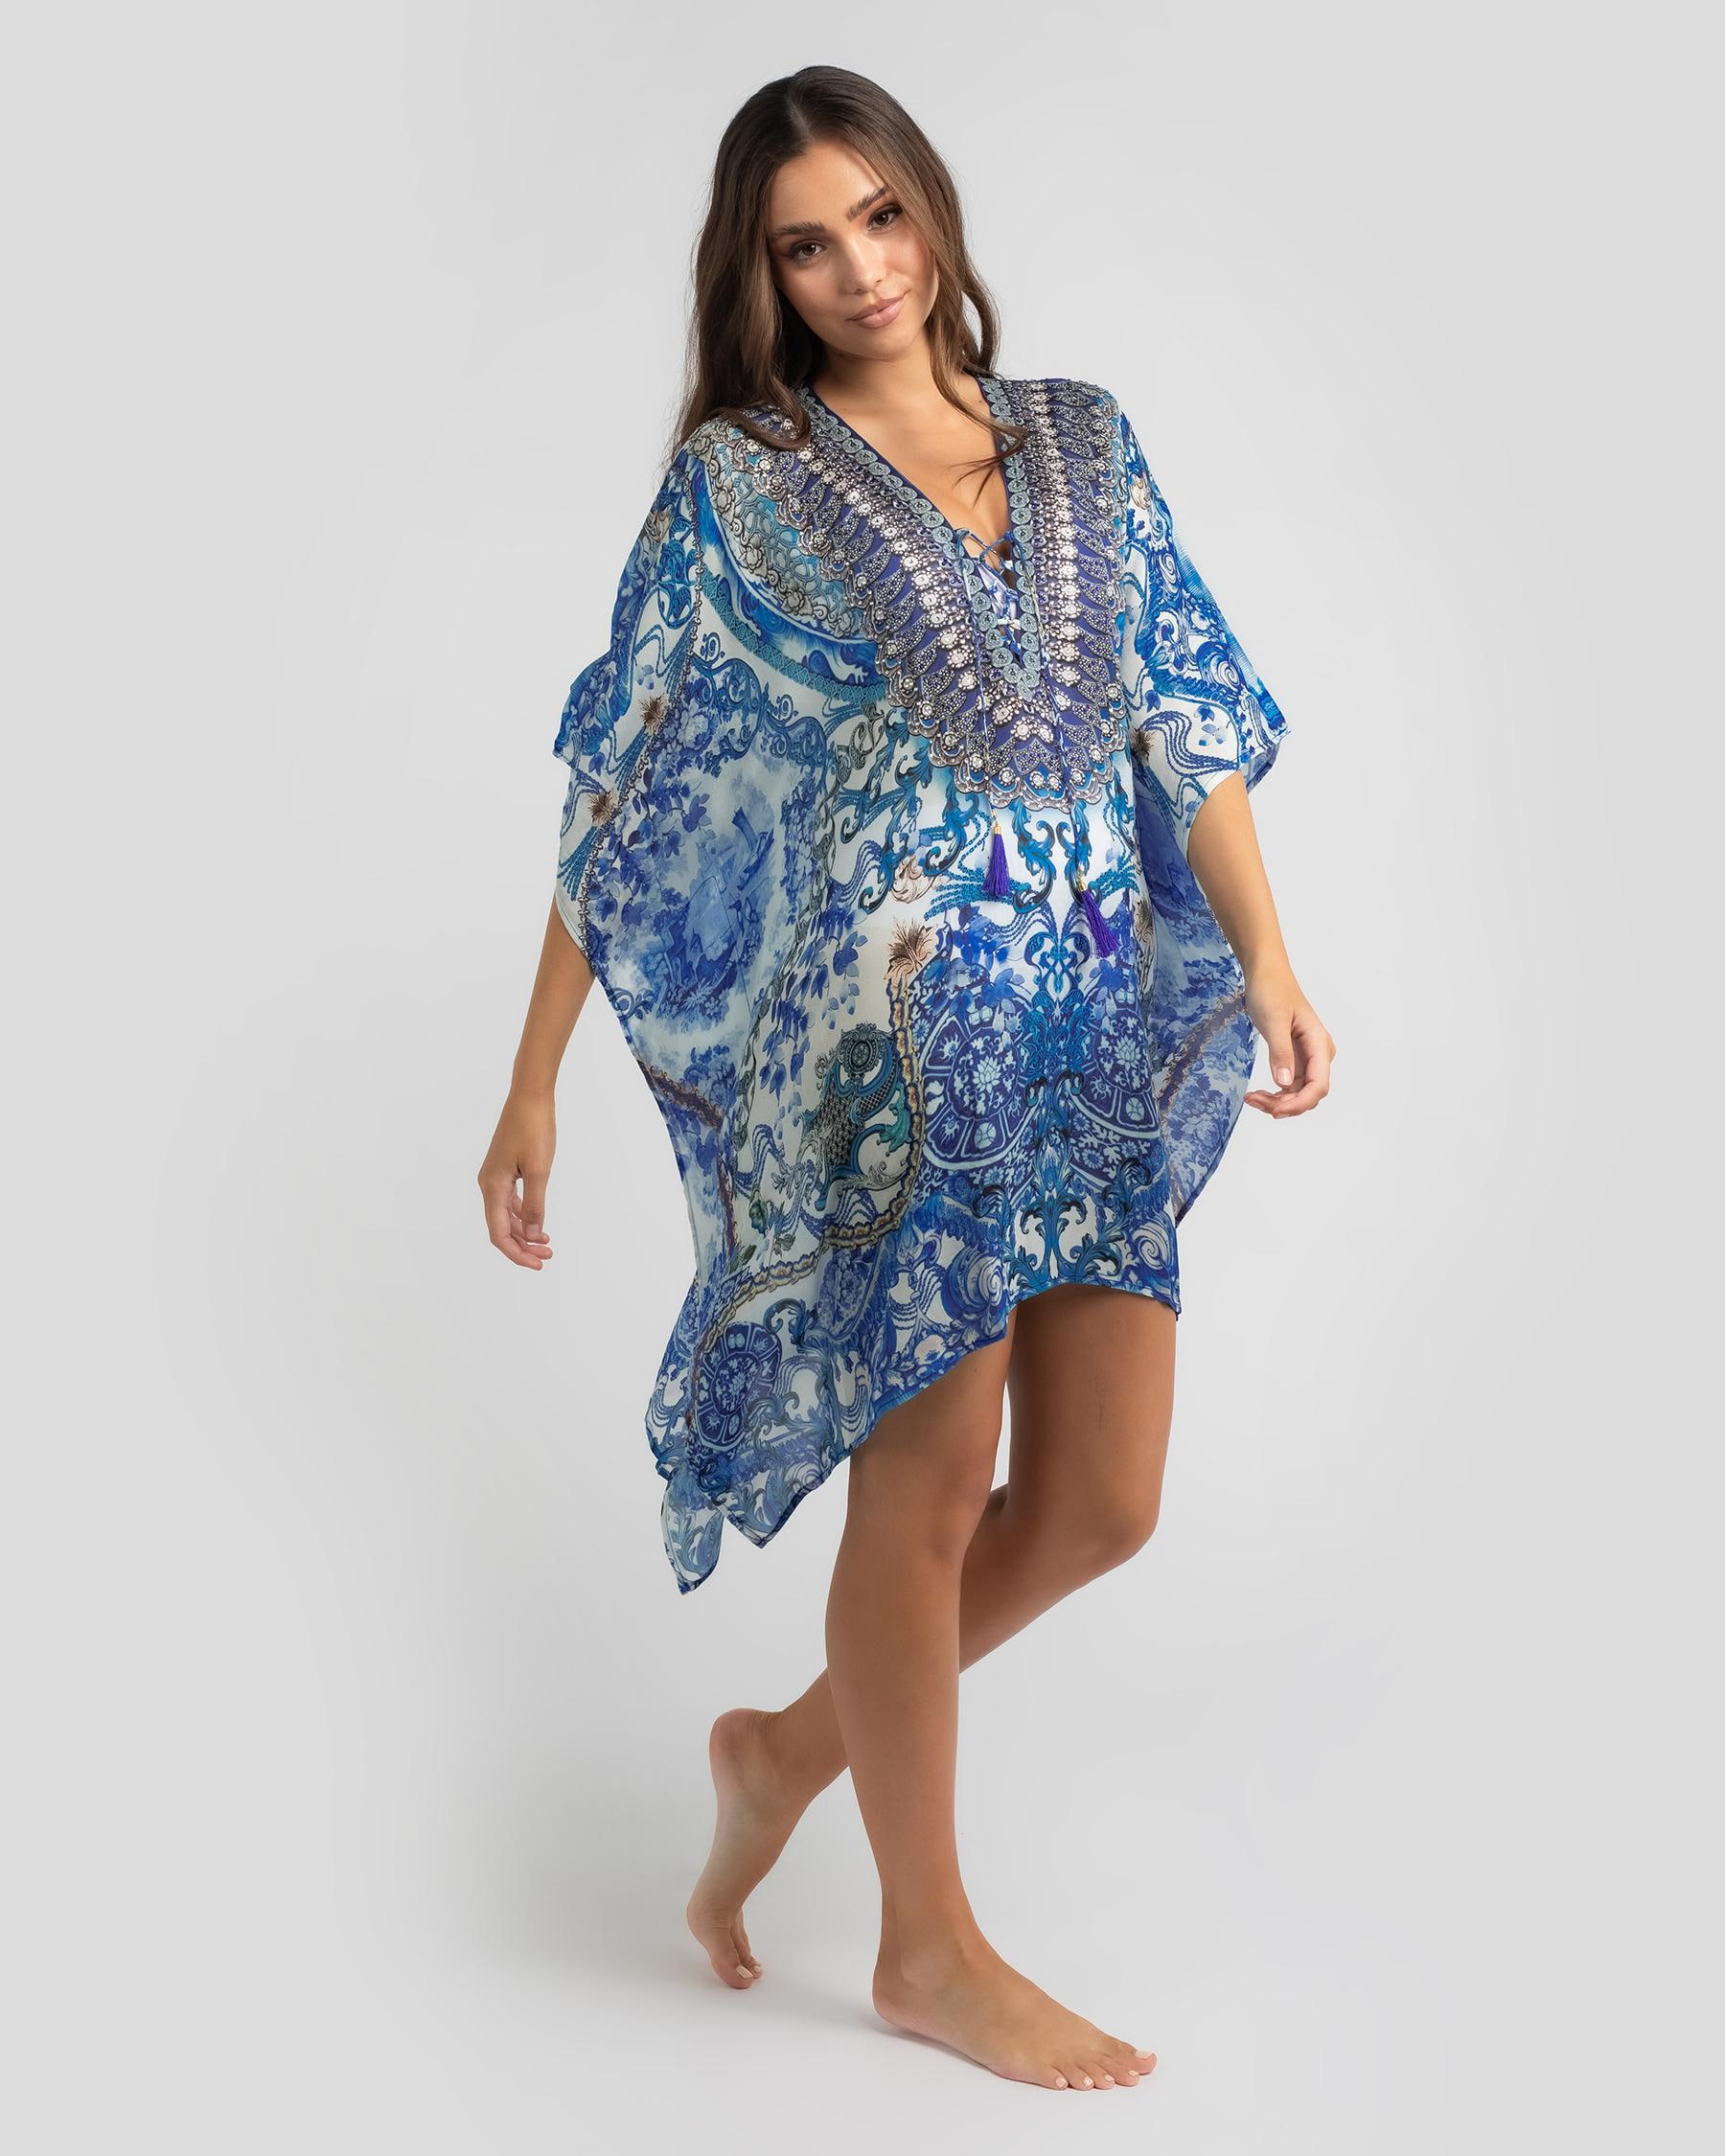 Shop Kaiami Dimitra Beach Cover In Blue - Fast Shipping & Easy Returns ...